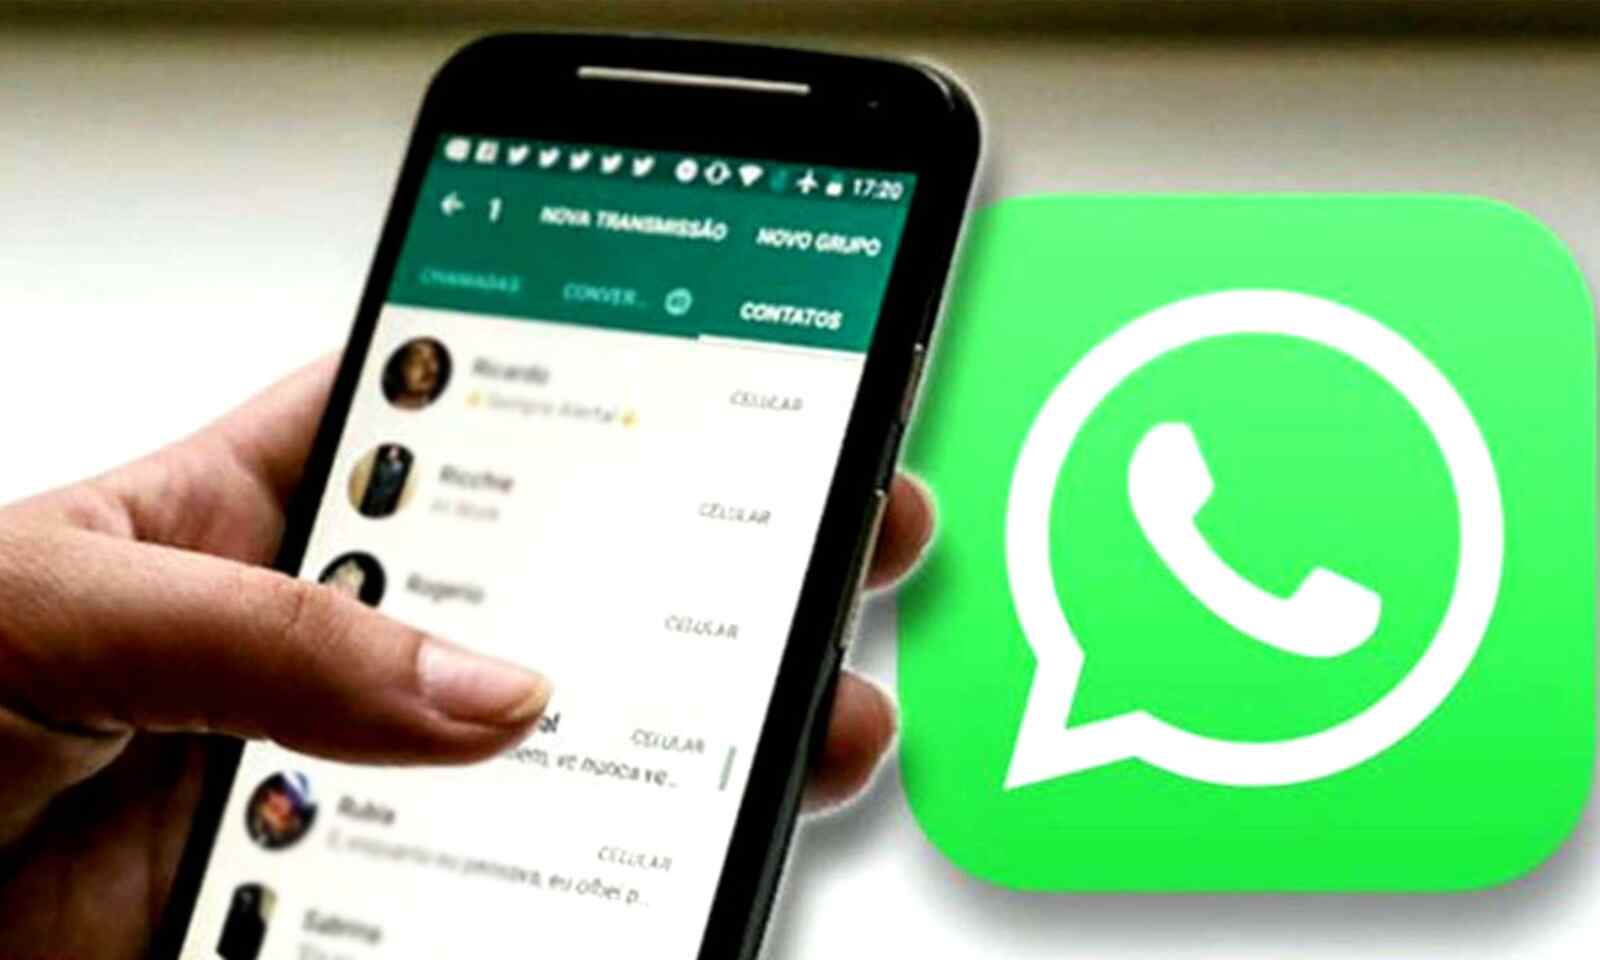 WhatsApp Spotted Beta-Testing Sticker Creation Feature, Stable Version Said to Launch Soon